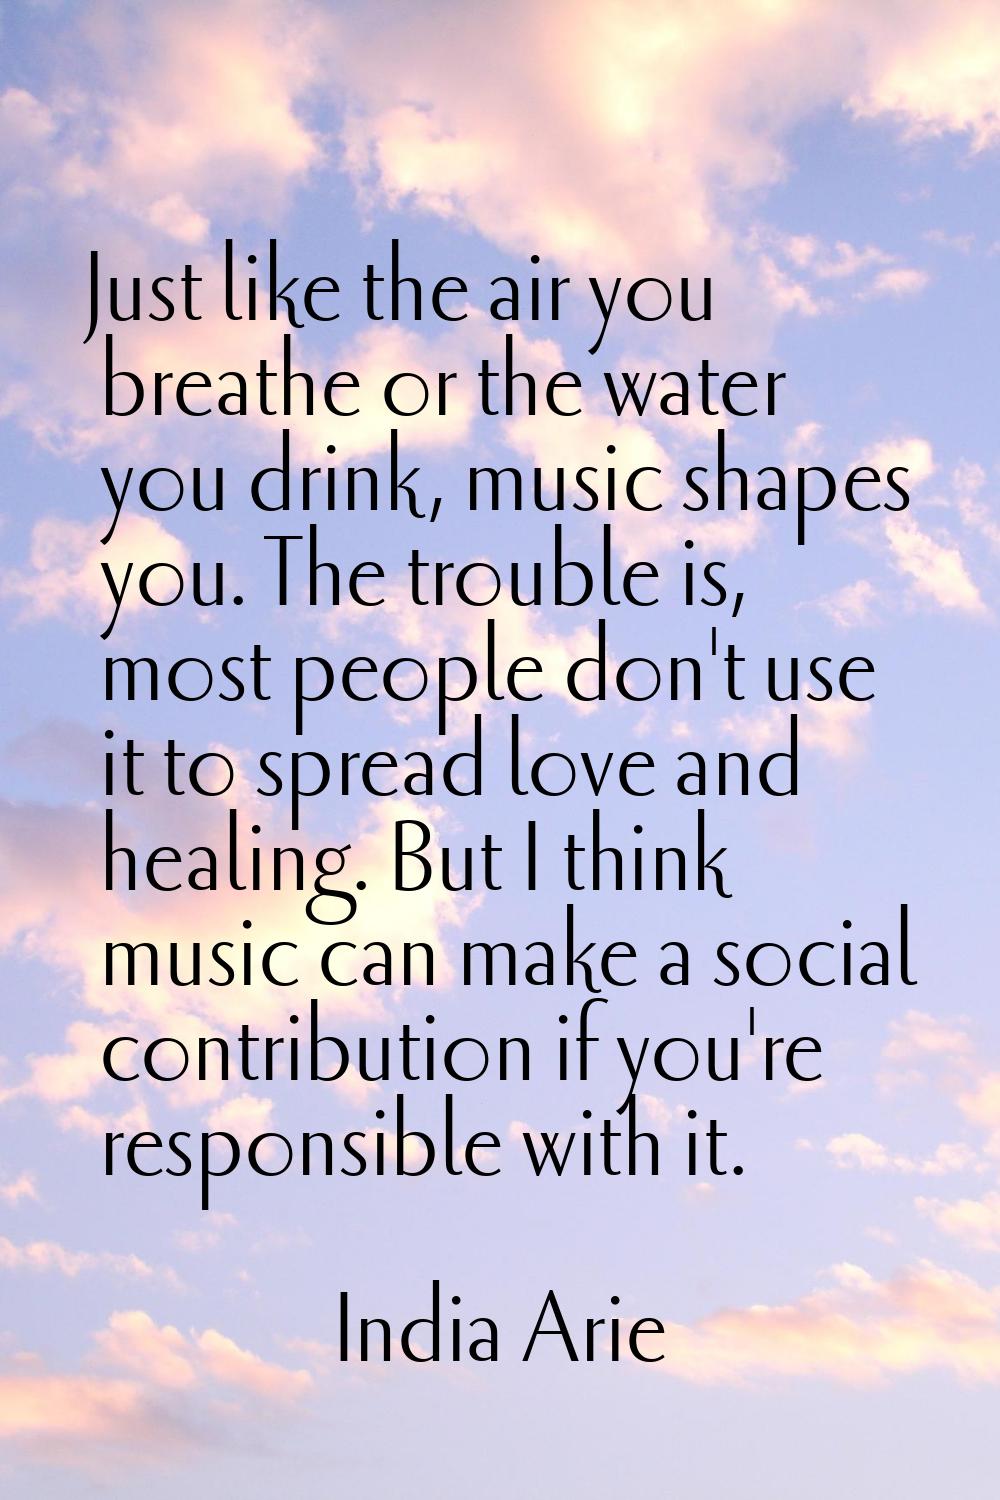 Just like the air you breathe or the water you drink, music shapes you. The trouble is, most people